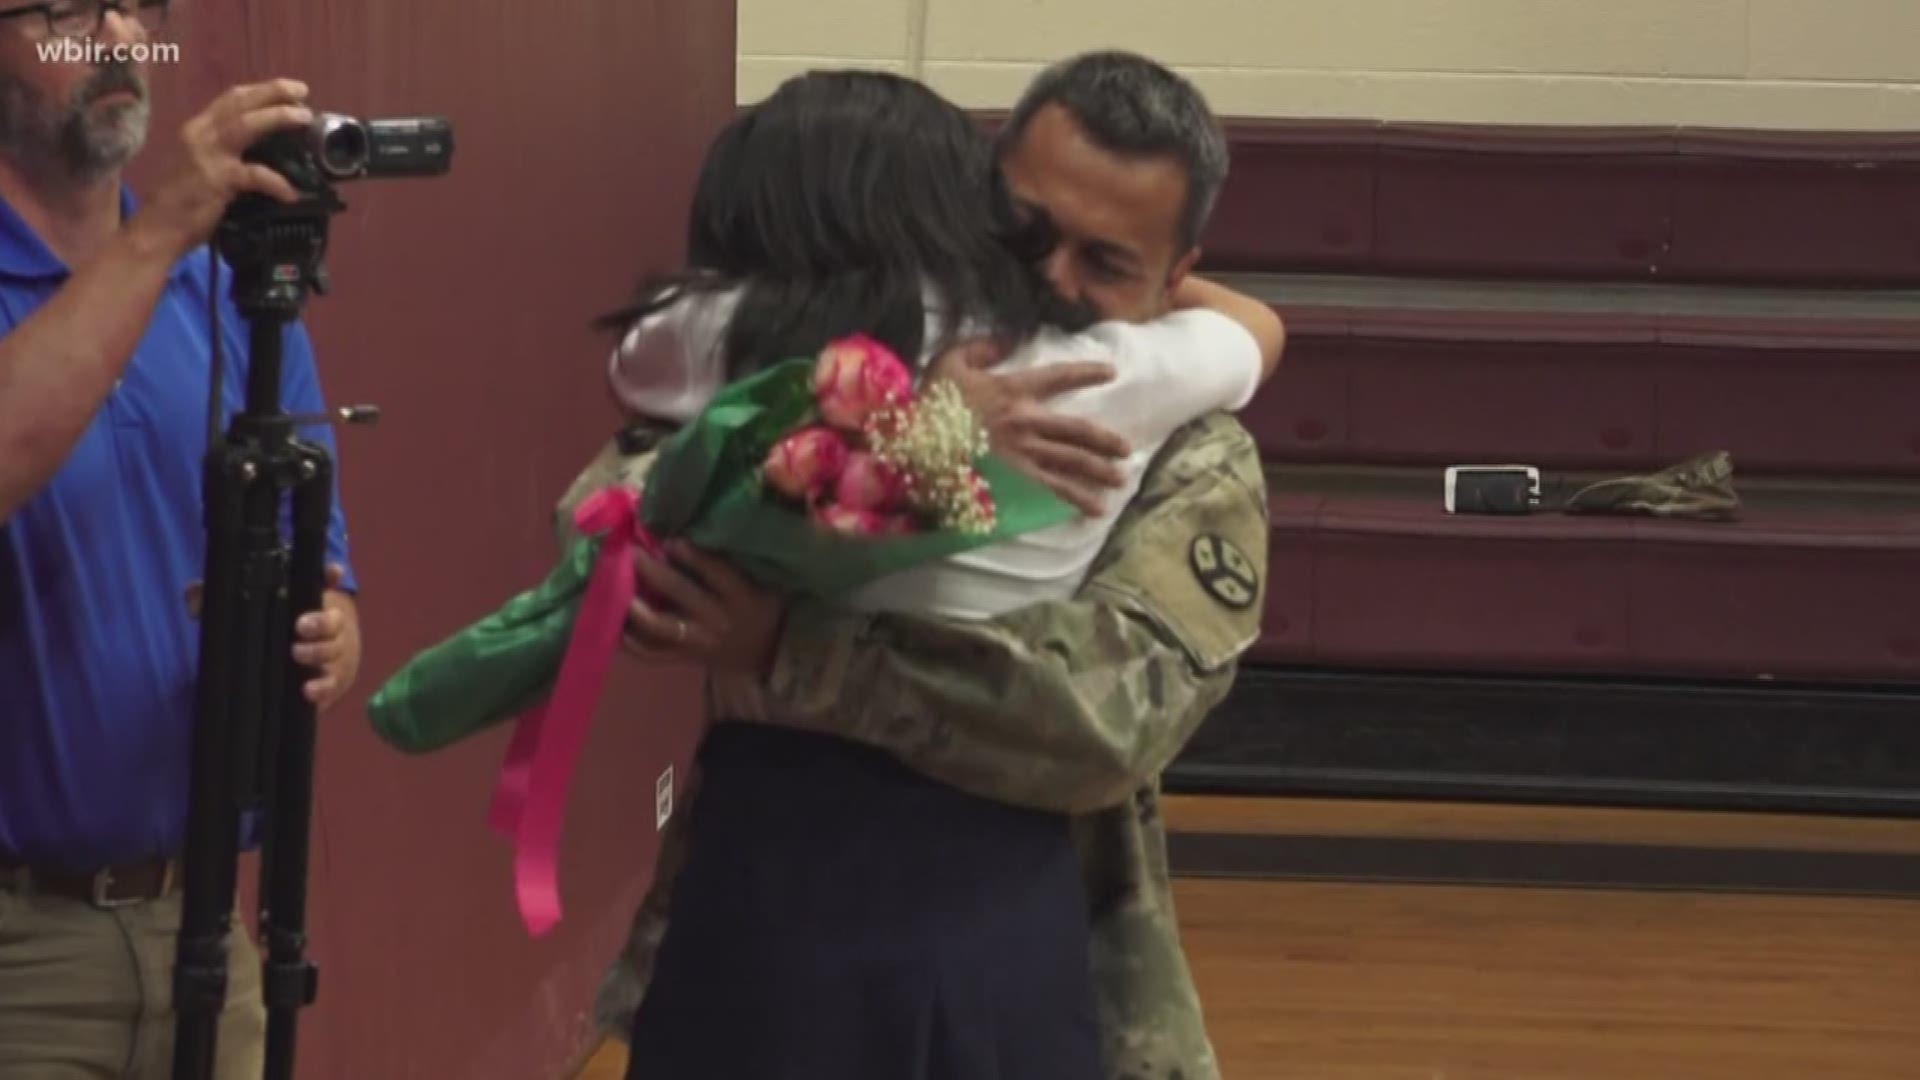 Students at Sacred Heart School gathered in the gym for an award ceremony this morning, and that's when one 6th grader got a special surprise from her father.